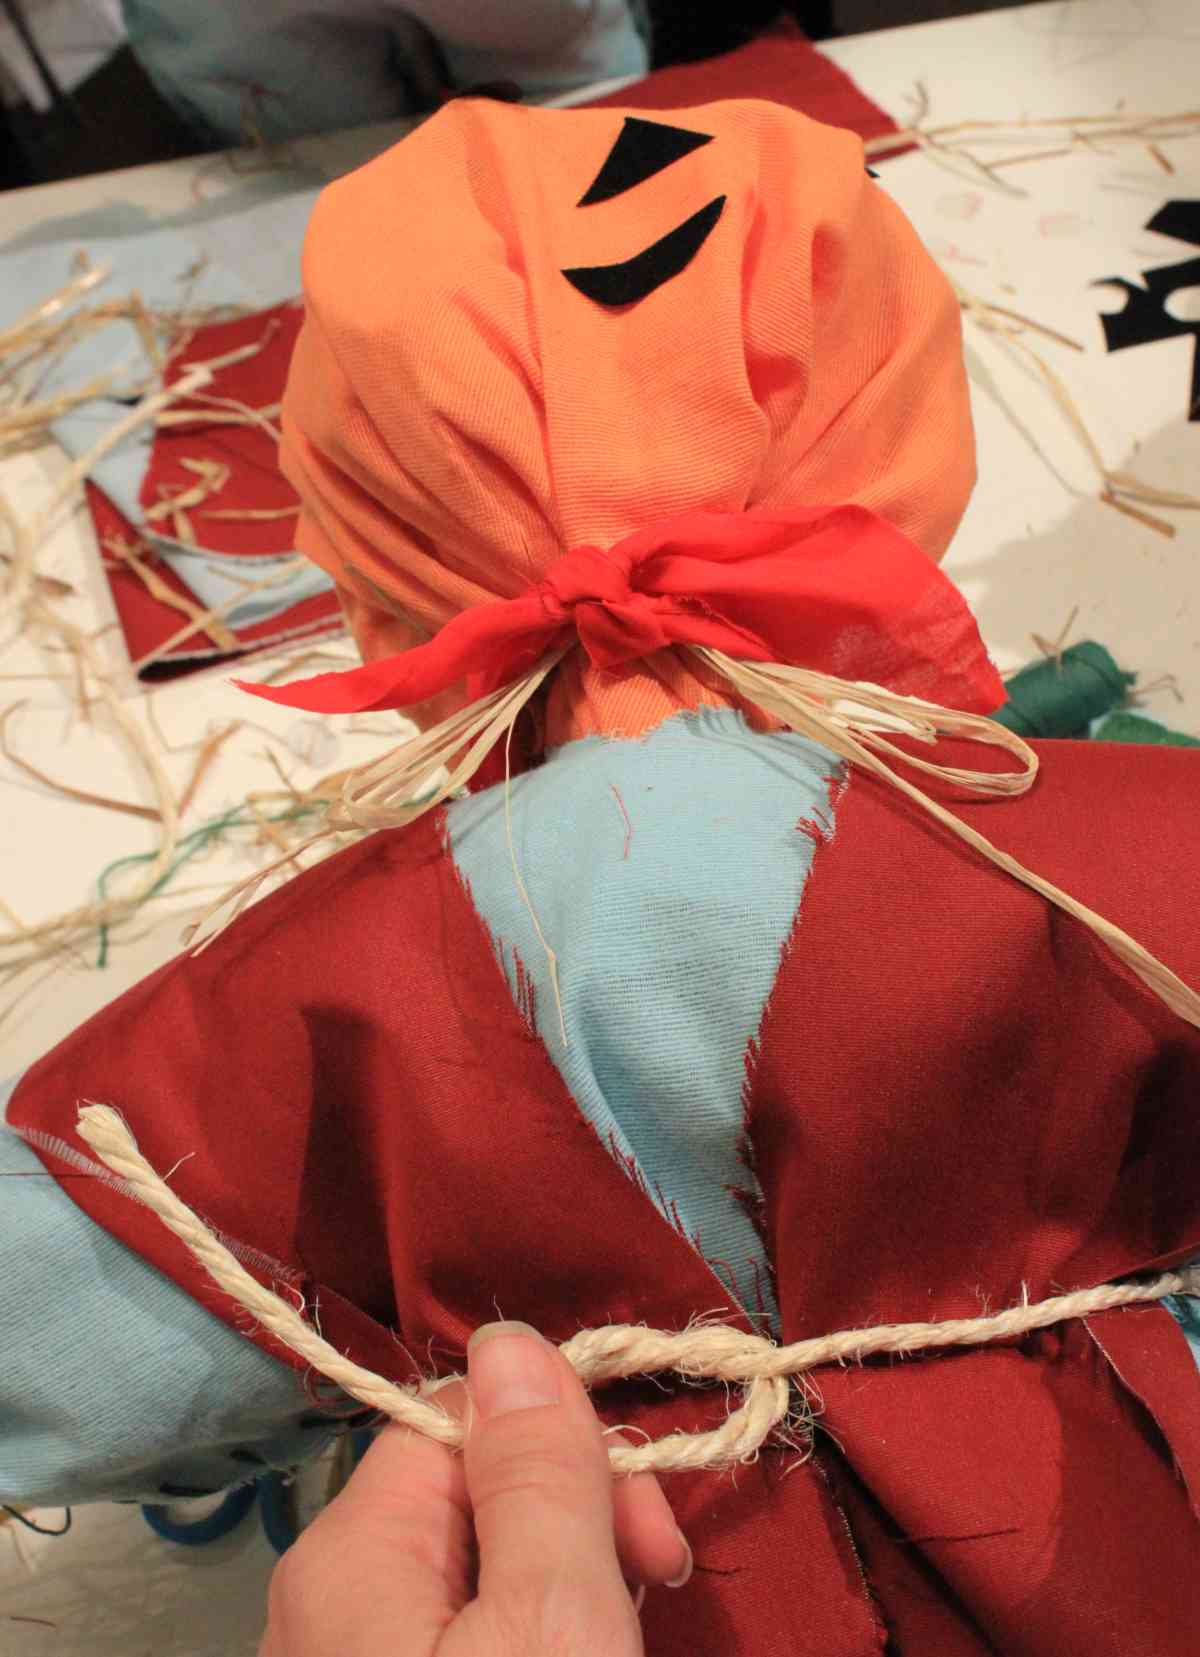 Head and torso of the scarecrow, in this step tying a belt